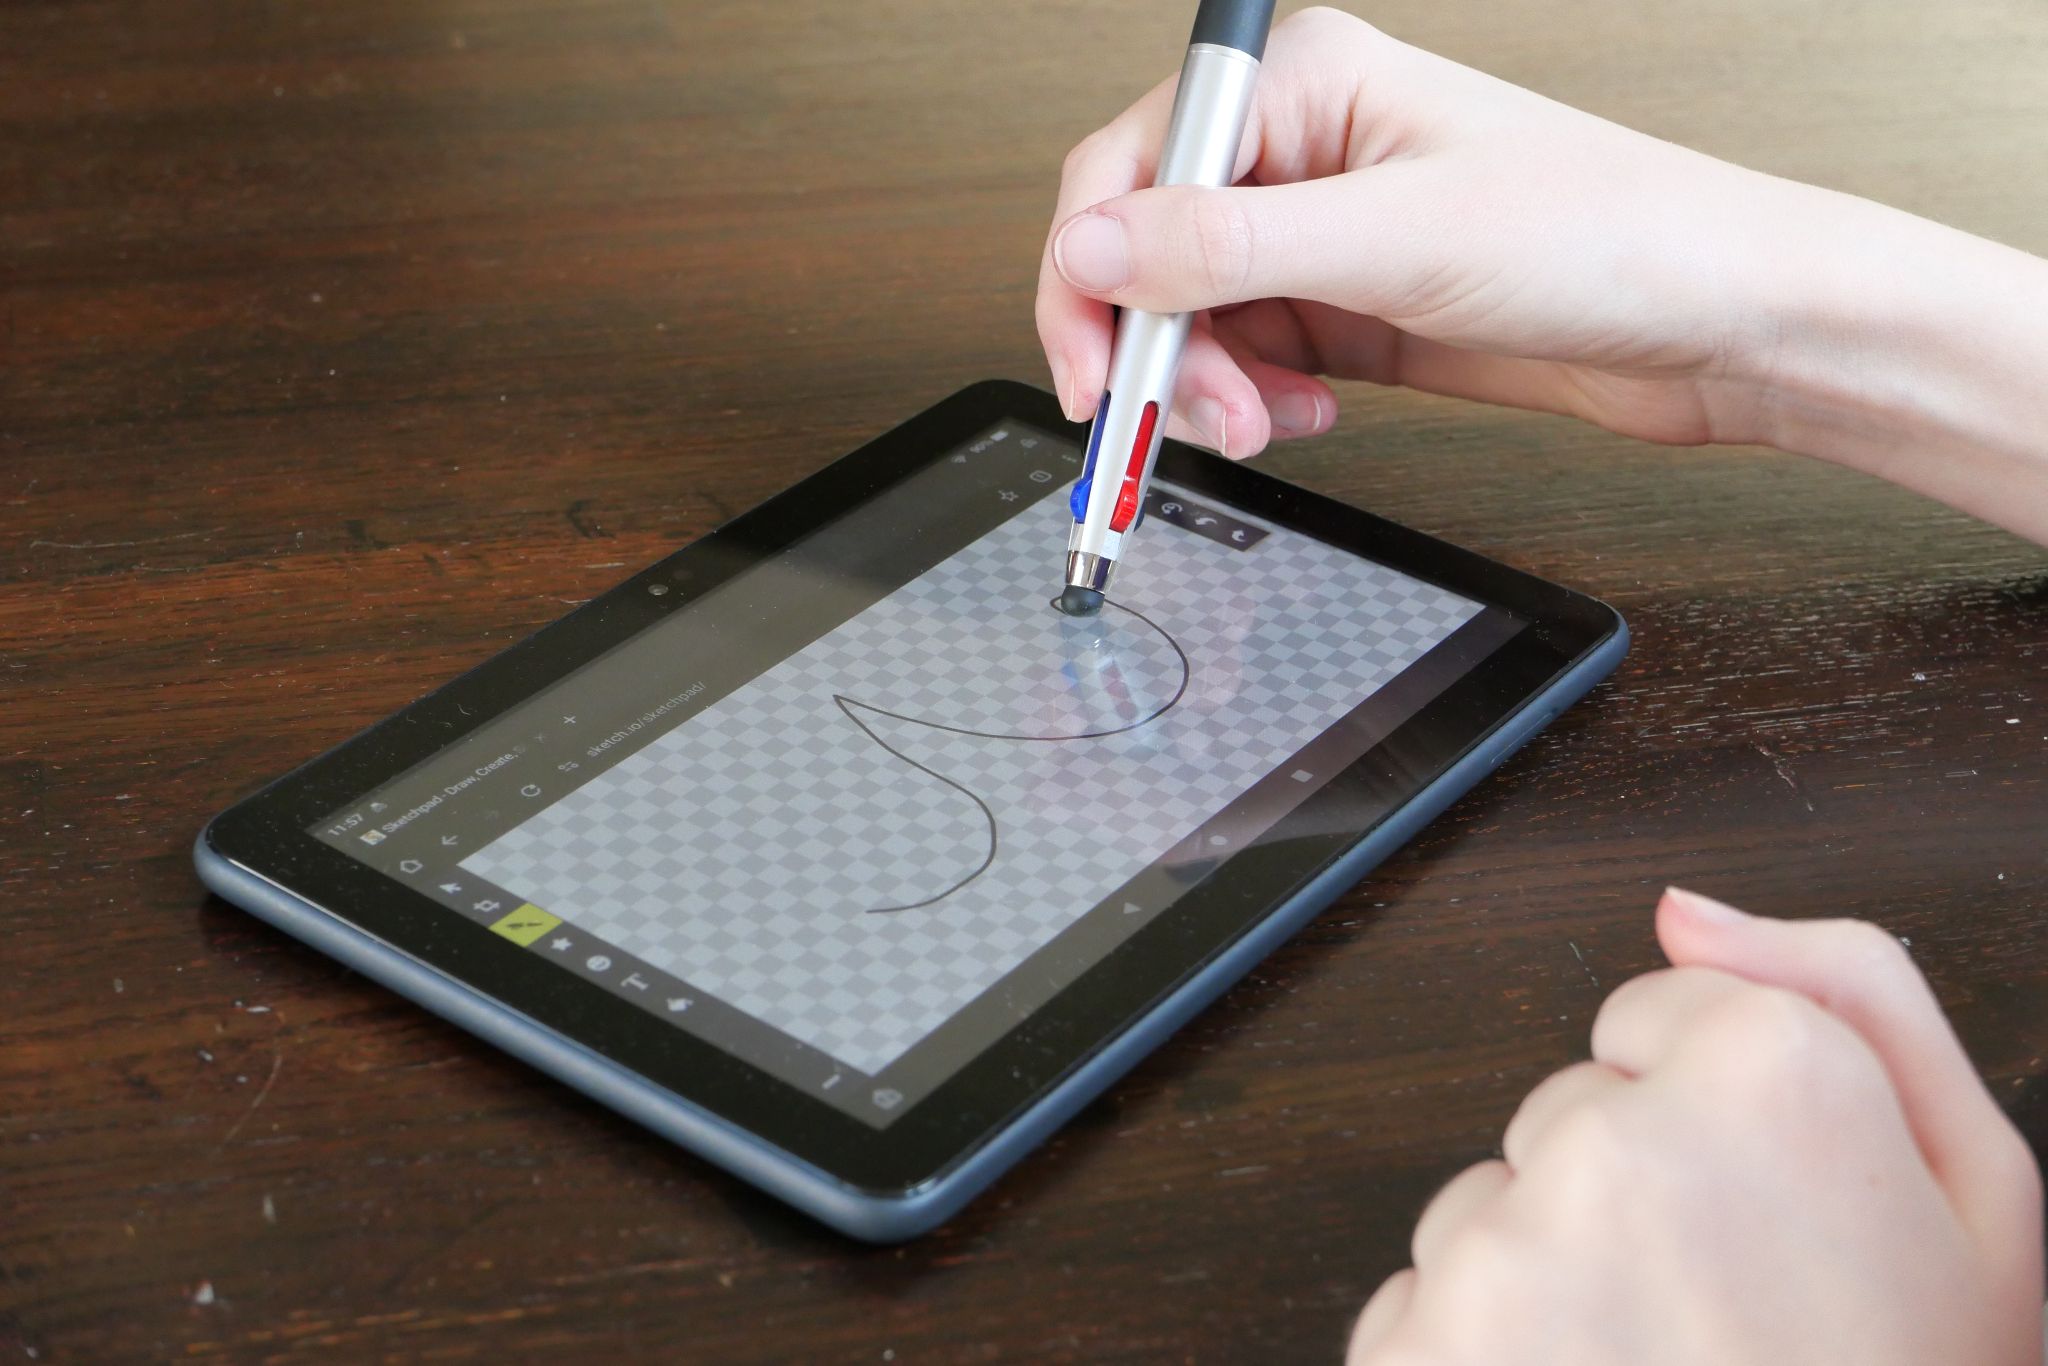 Photo of a hand drawing on a tablet with a passive stylus.